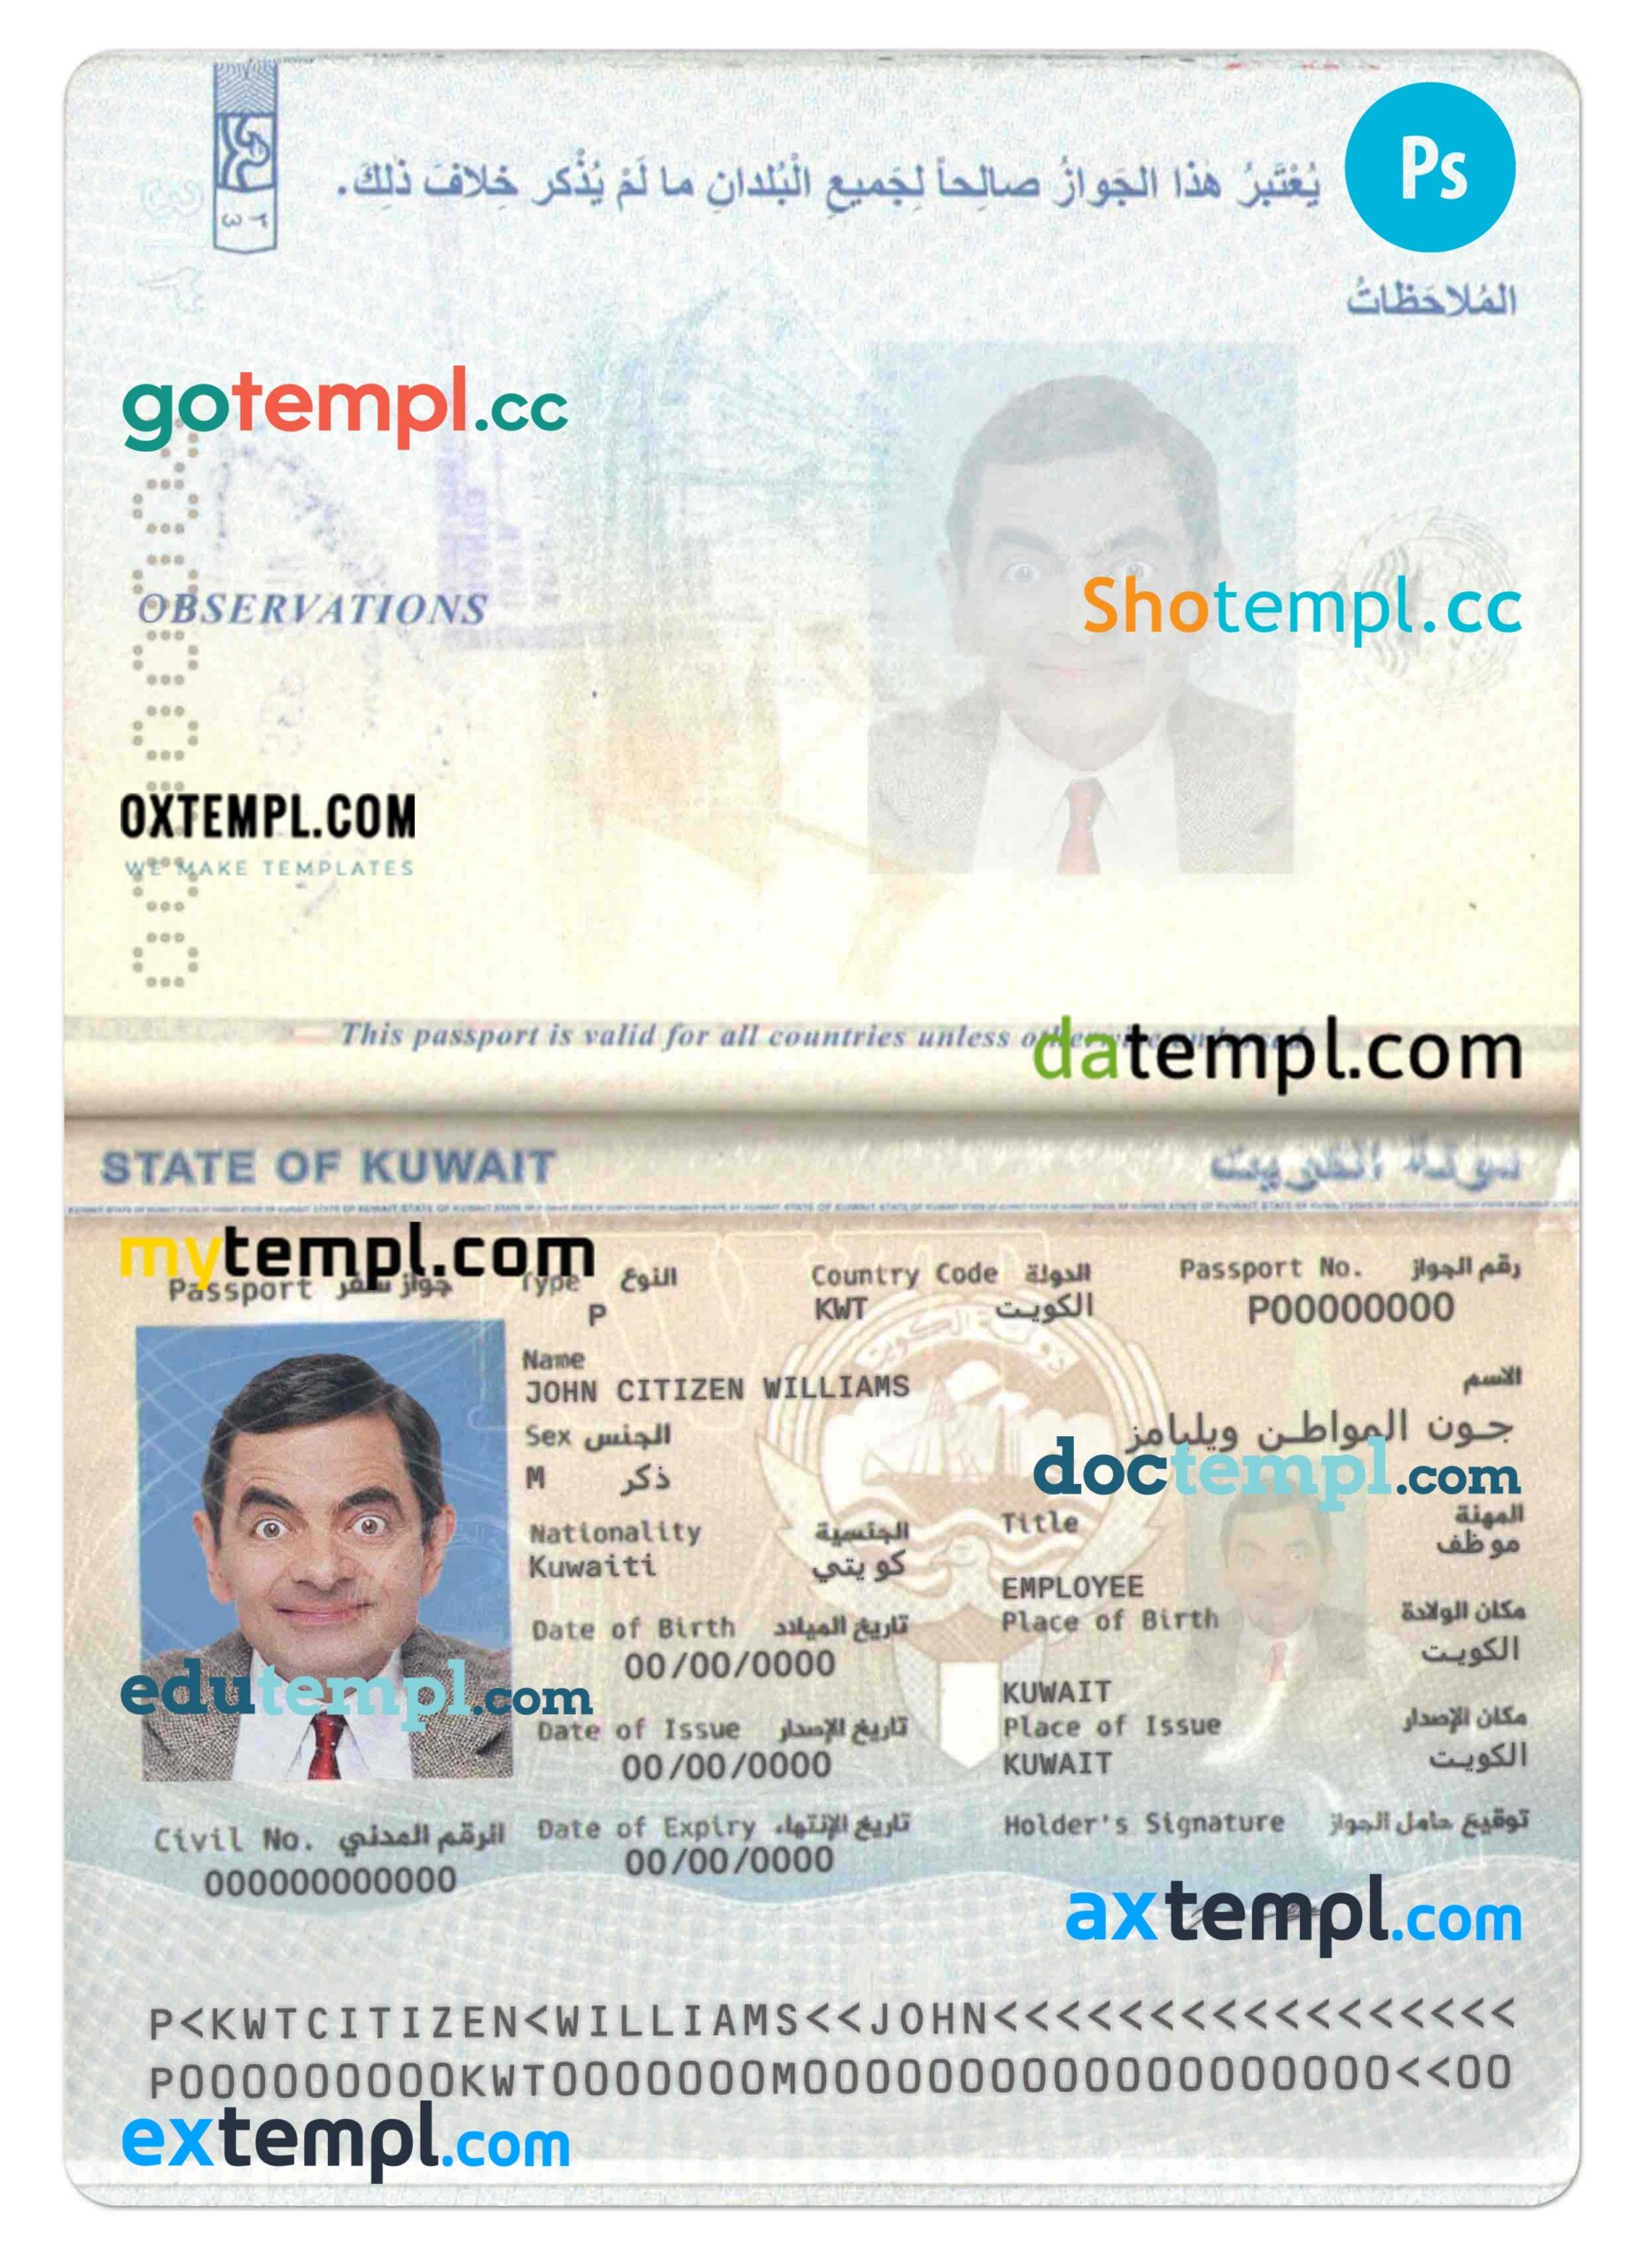 Kuwait passport PSD files, scan and photograghed image, 2 in 1